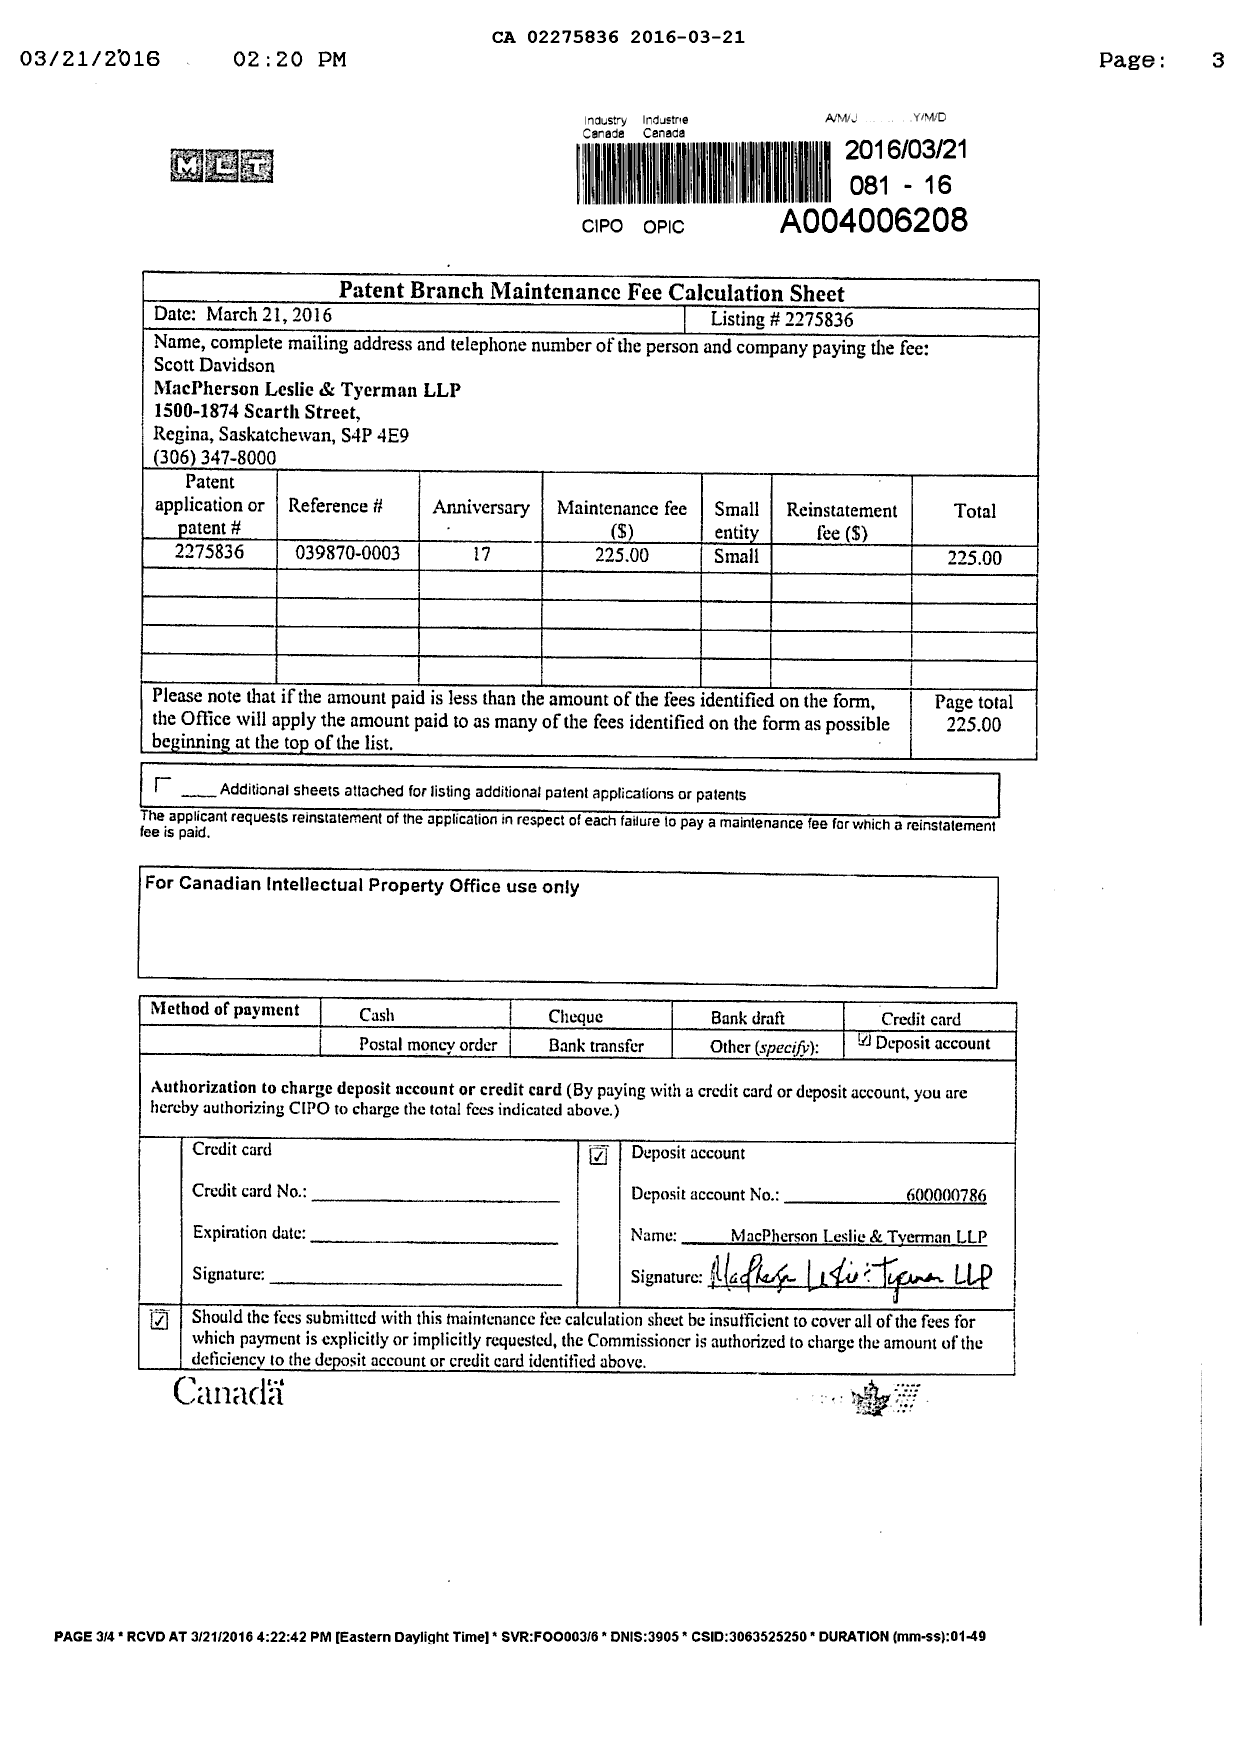 Canadian Patent Document 2275836. Maintenance Fee Payment 20160321. Image 3 of 3